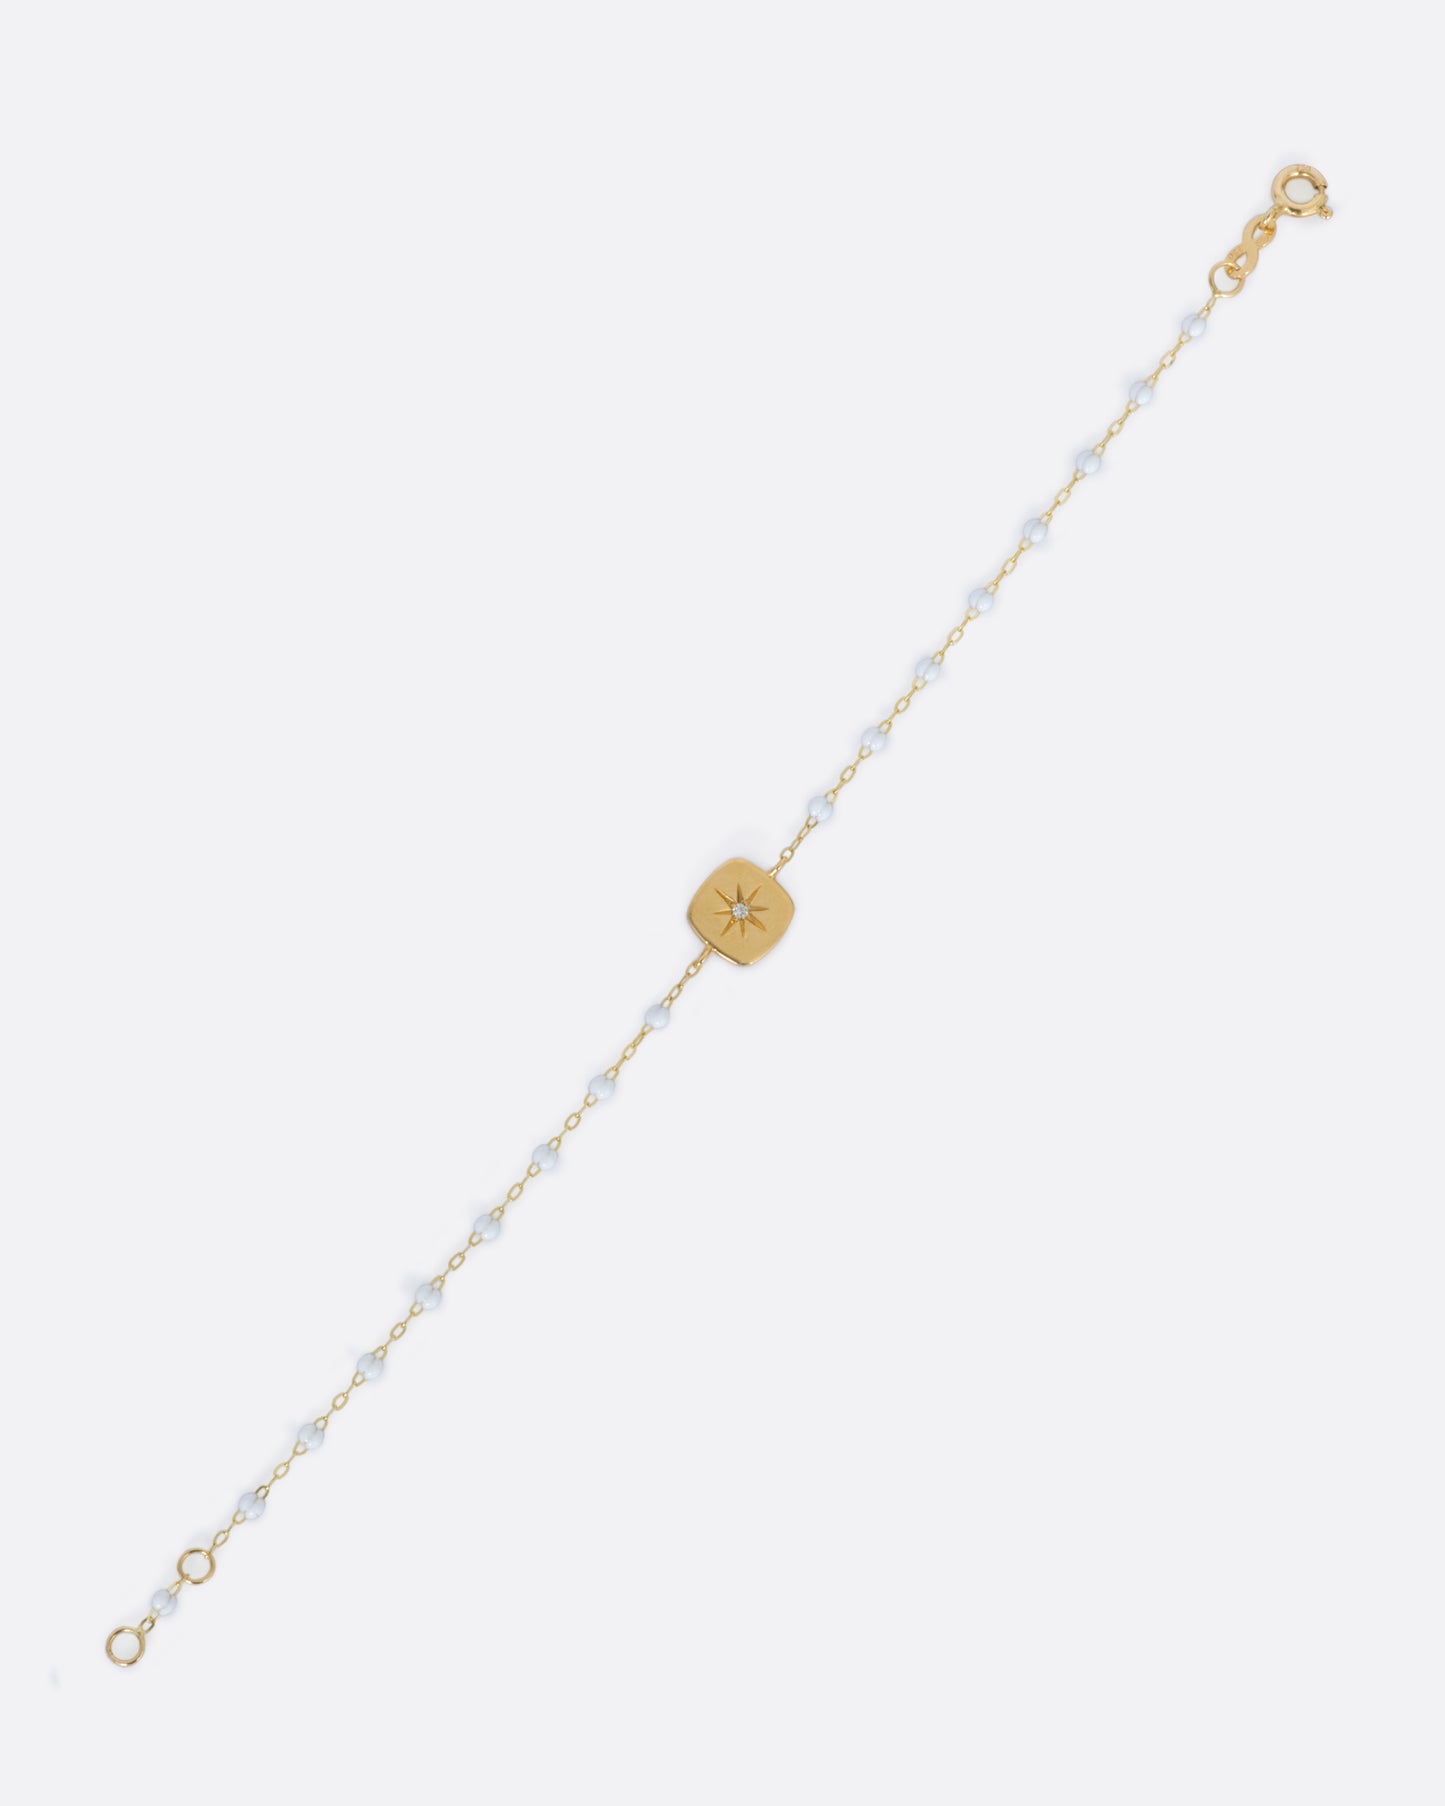 A classic yellow gold Gigi Clozeau necklace with white resin beads and a square tag pendant, with a star-set diamond at its center.